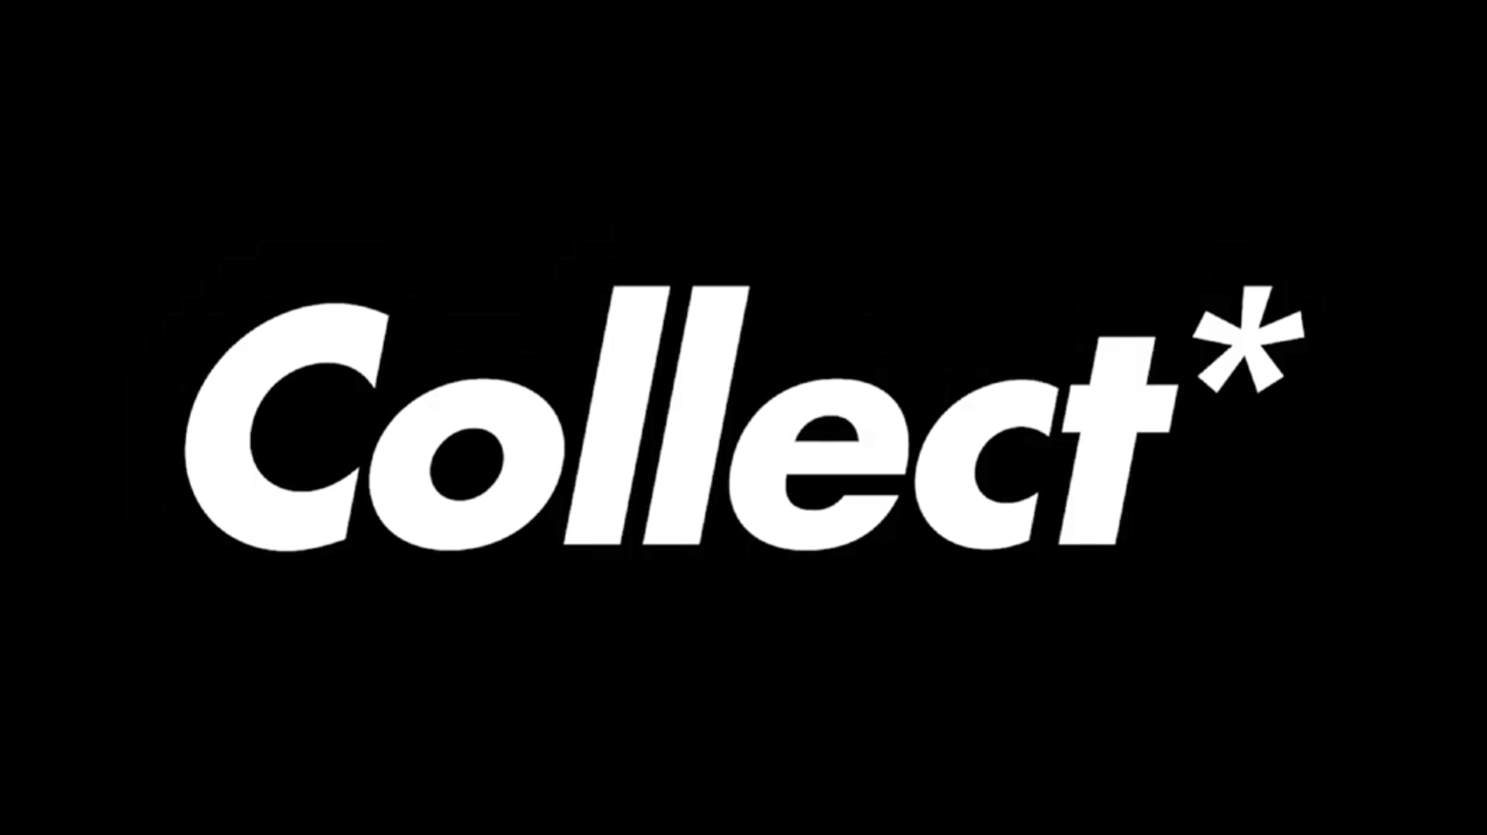 Collect_title